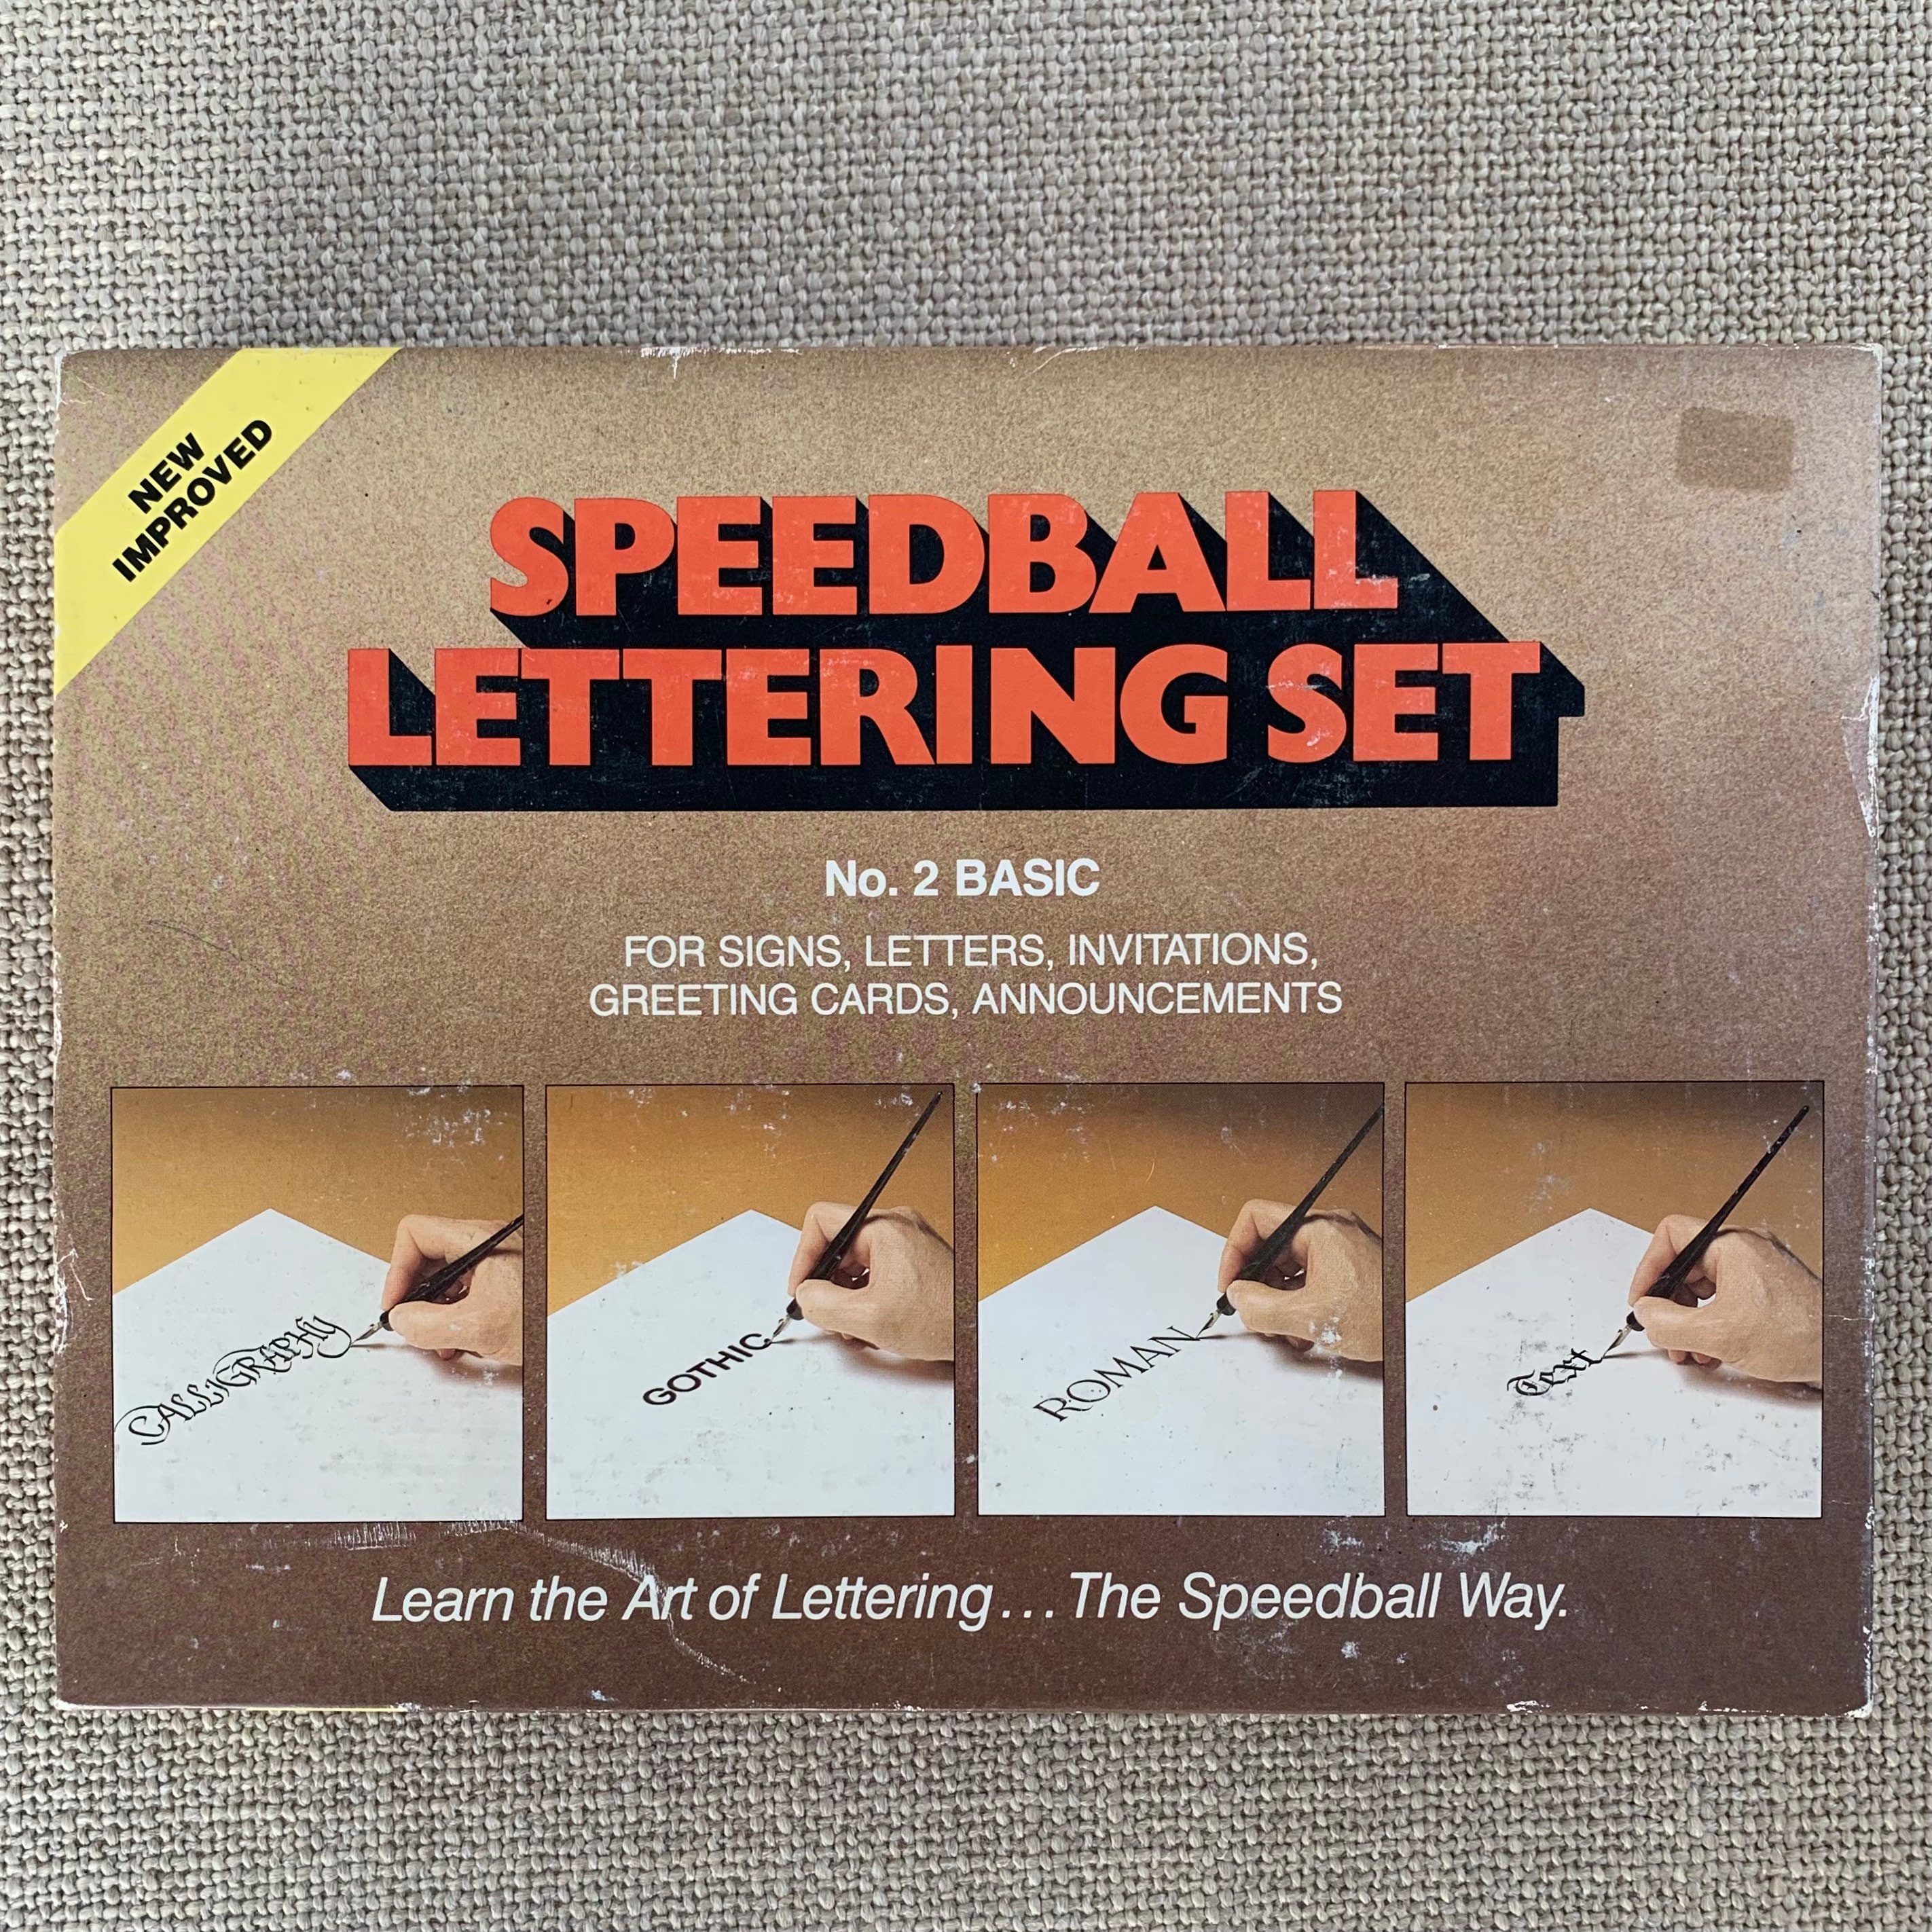 Leroy technical lettering kit. I was told some people here might